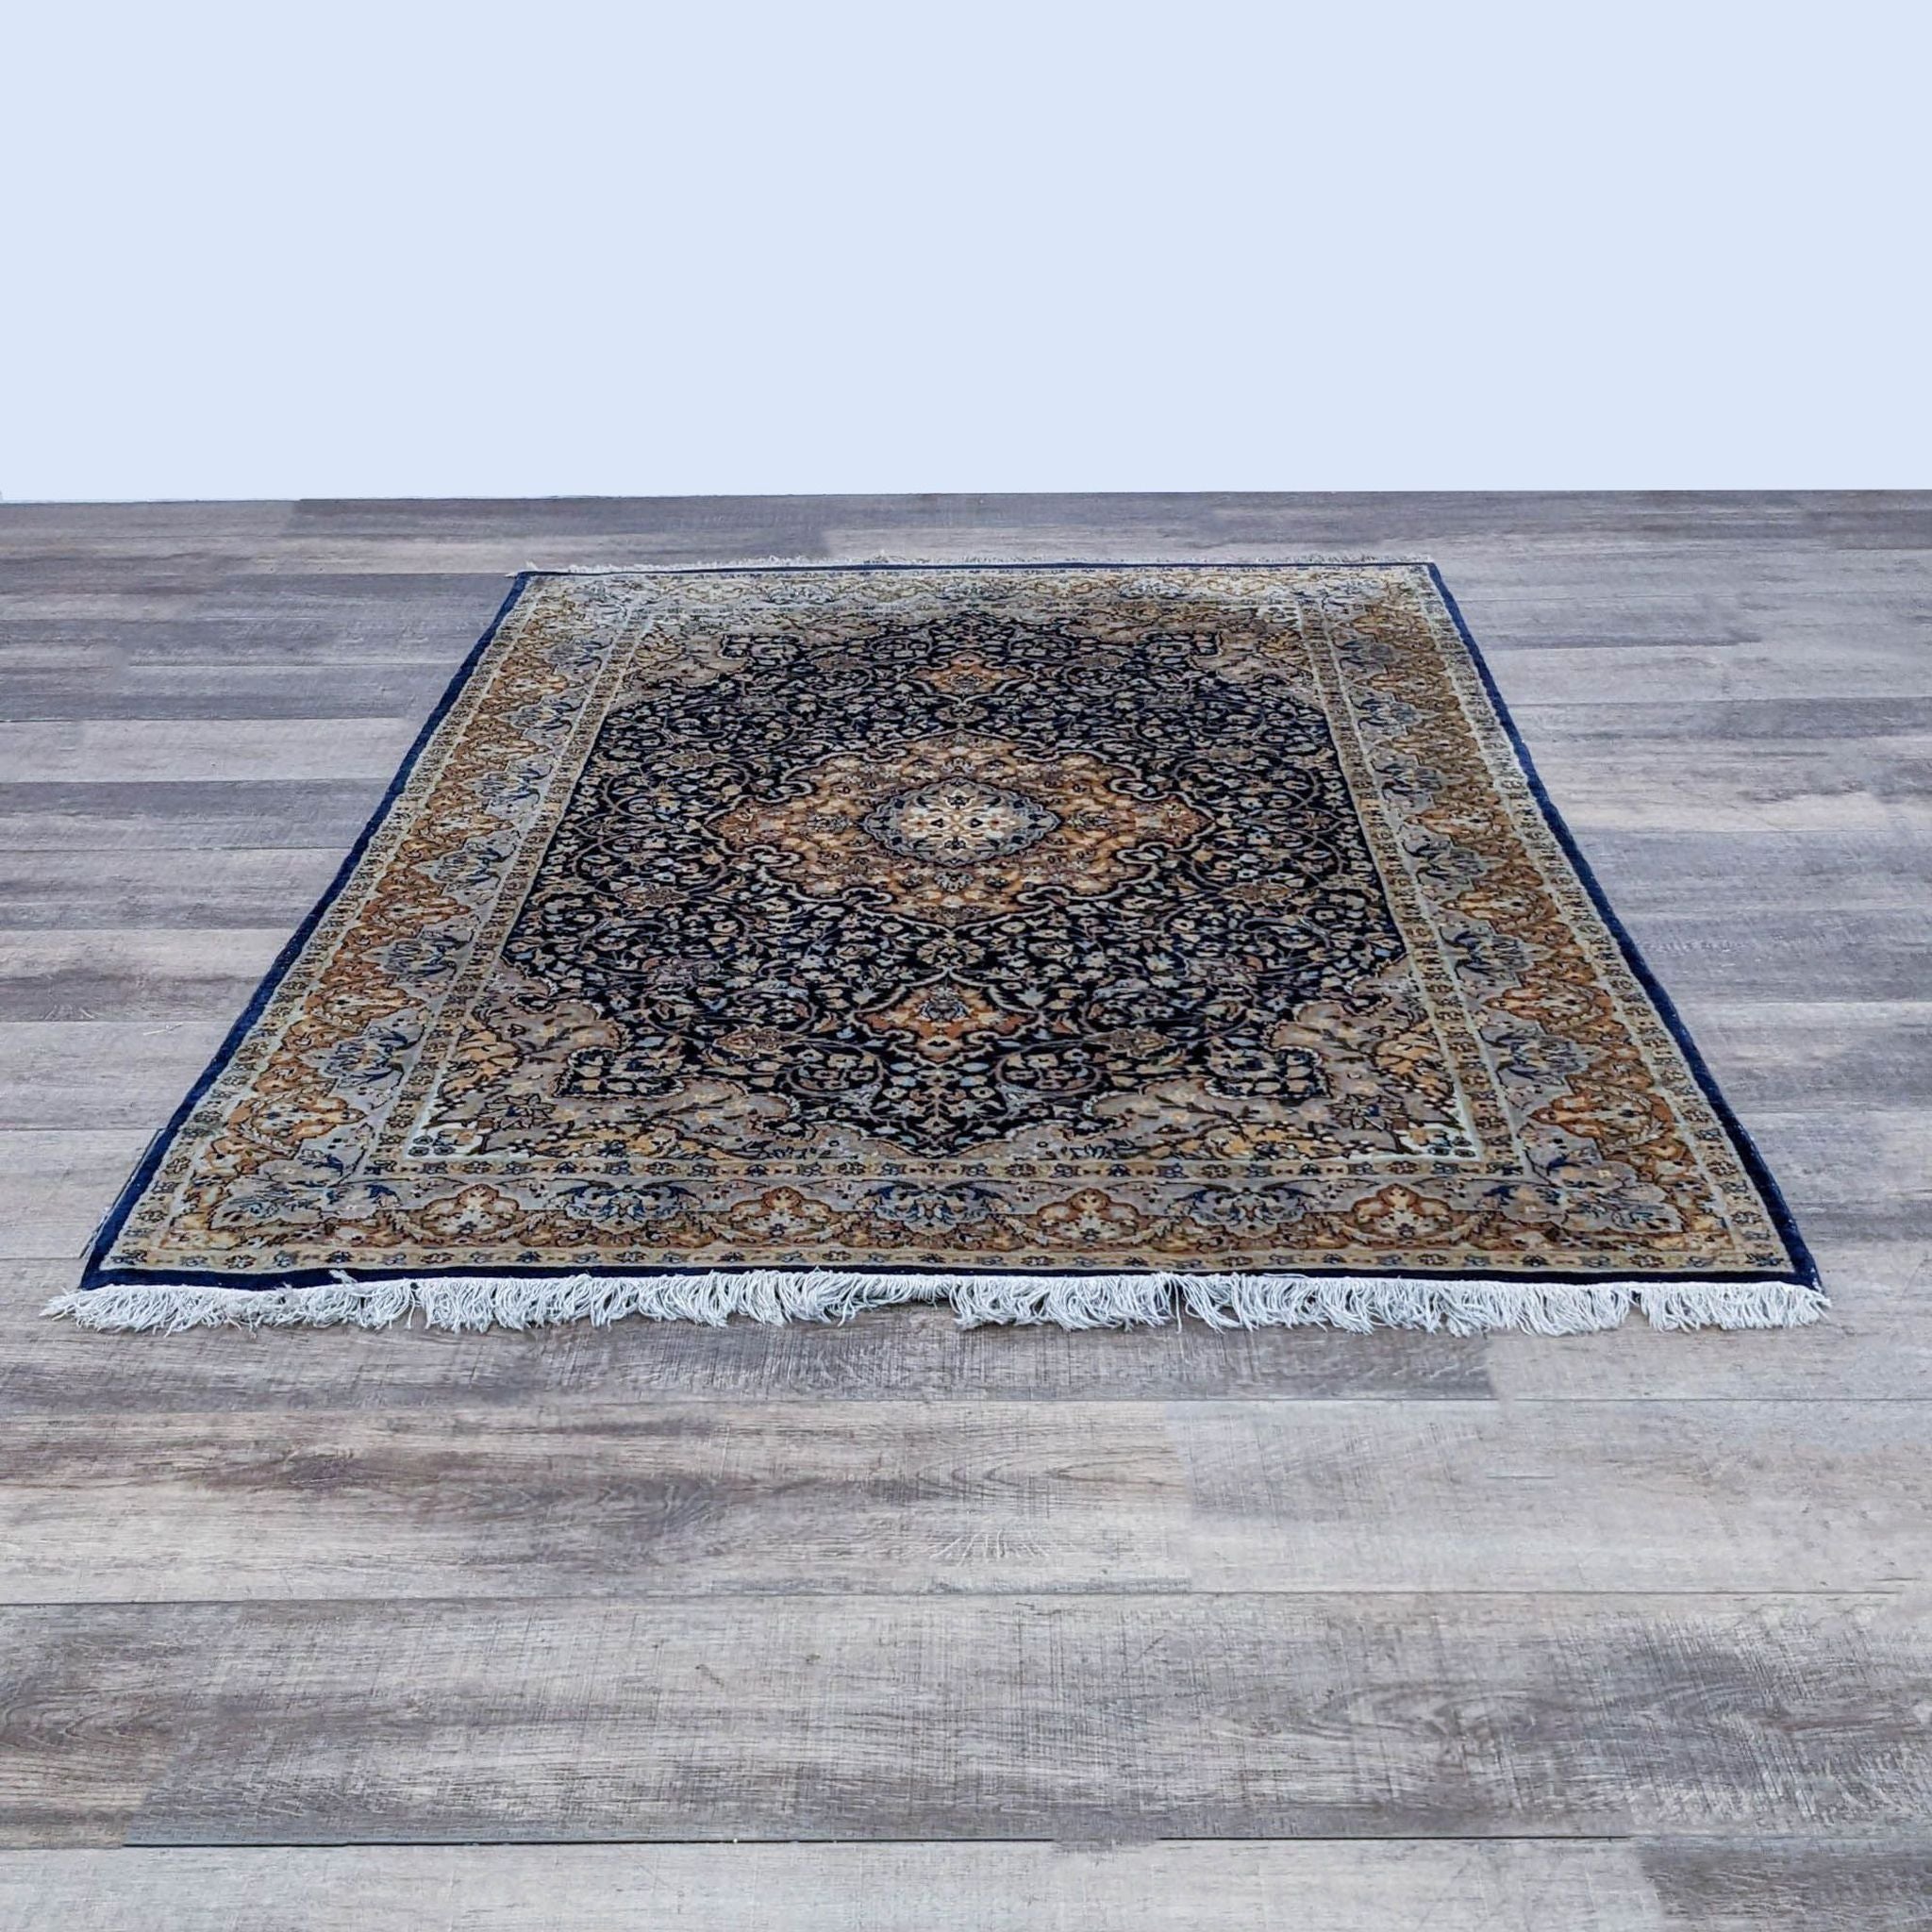 7' x 4.5' Reperch Oriental rug with intricate patterns and fringes on wooden floor.